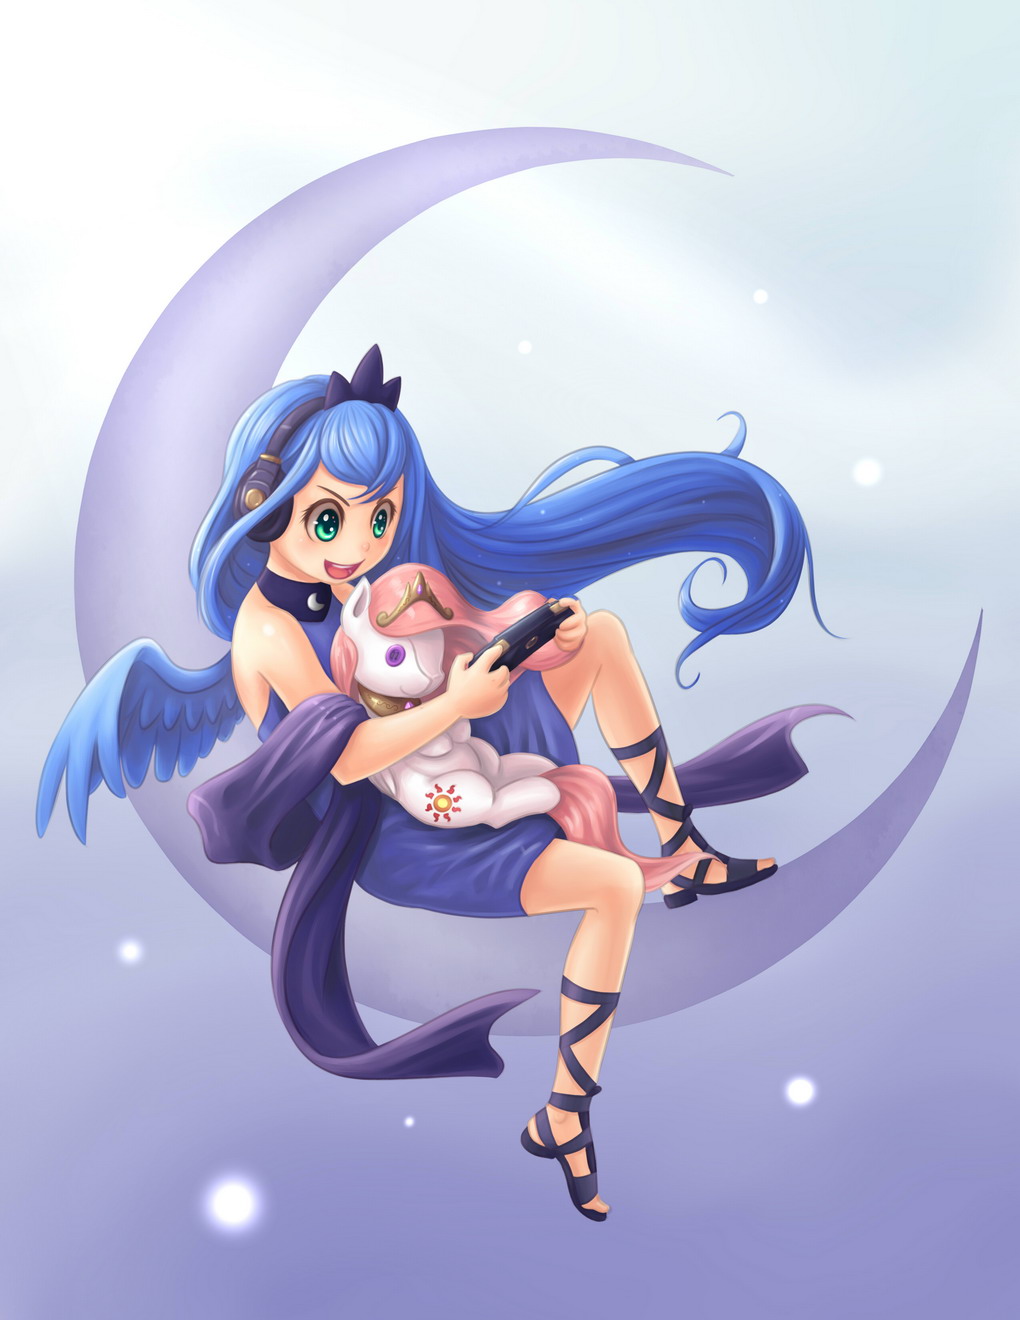 123hamster 1girl bare_shoulders blue_hair celestia_(my_little_pony) character_doll crescent dress green_eyes headphones highres long_hair luna_(my_little_pony) my_little_pony my_little_pony_friendship_is_magic objectification open_mouth personification shoes smile solo tiara wings